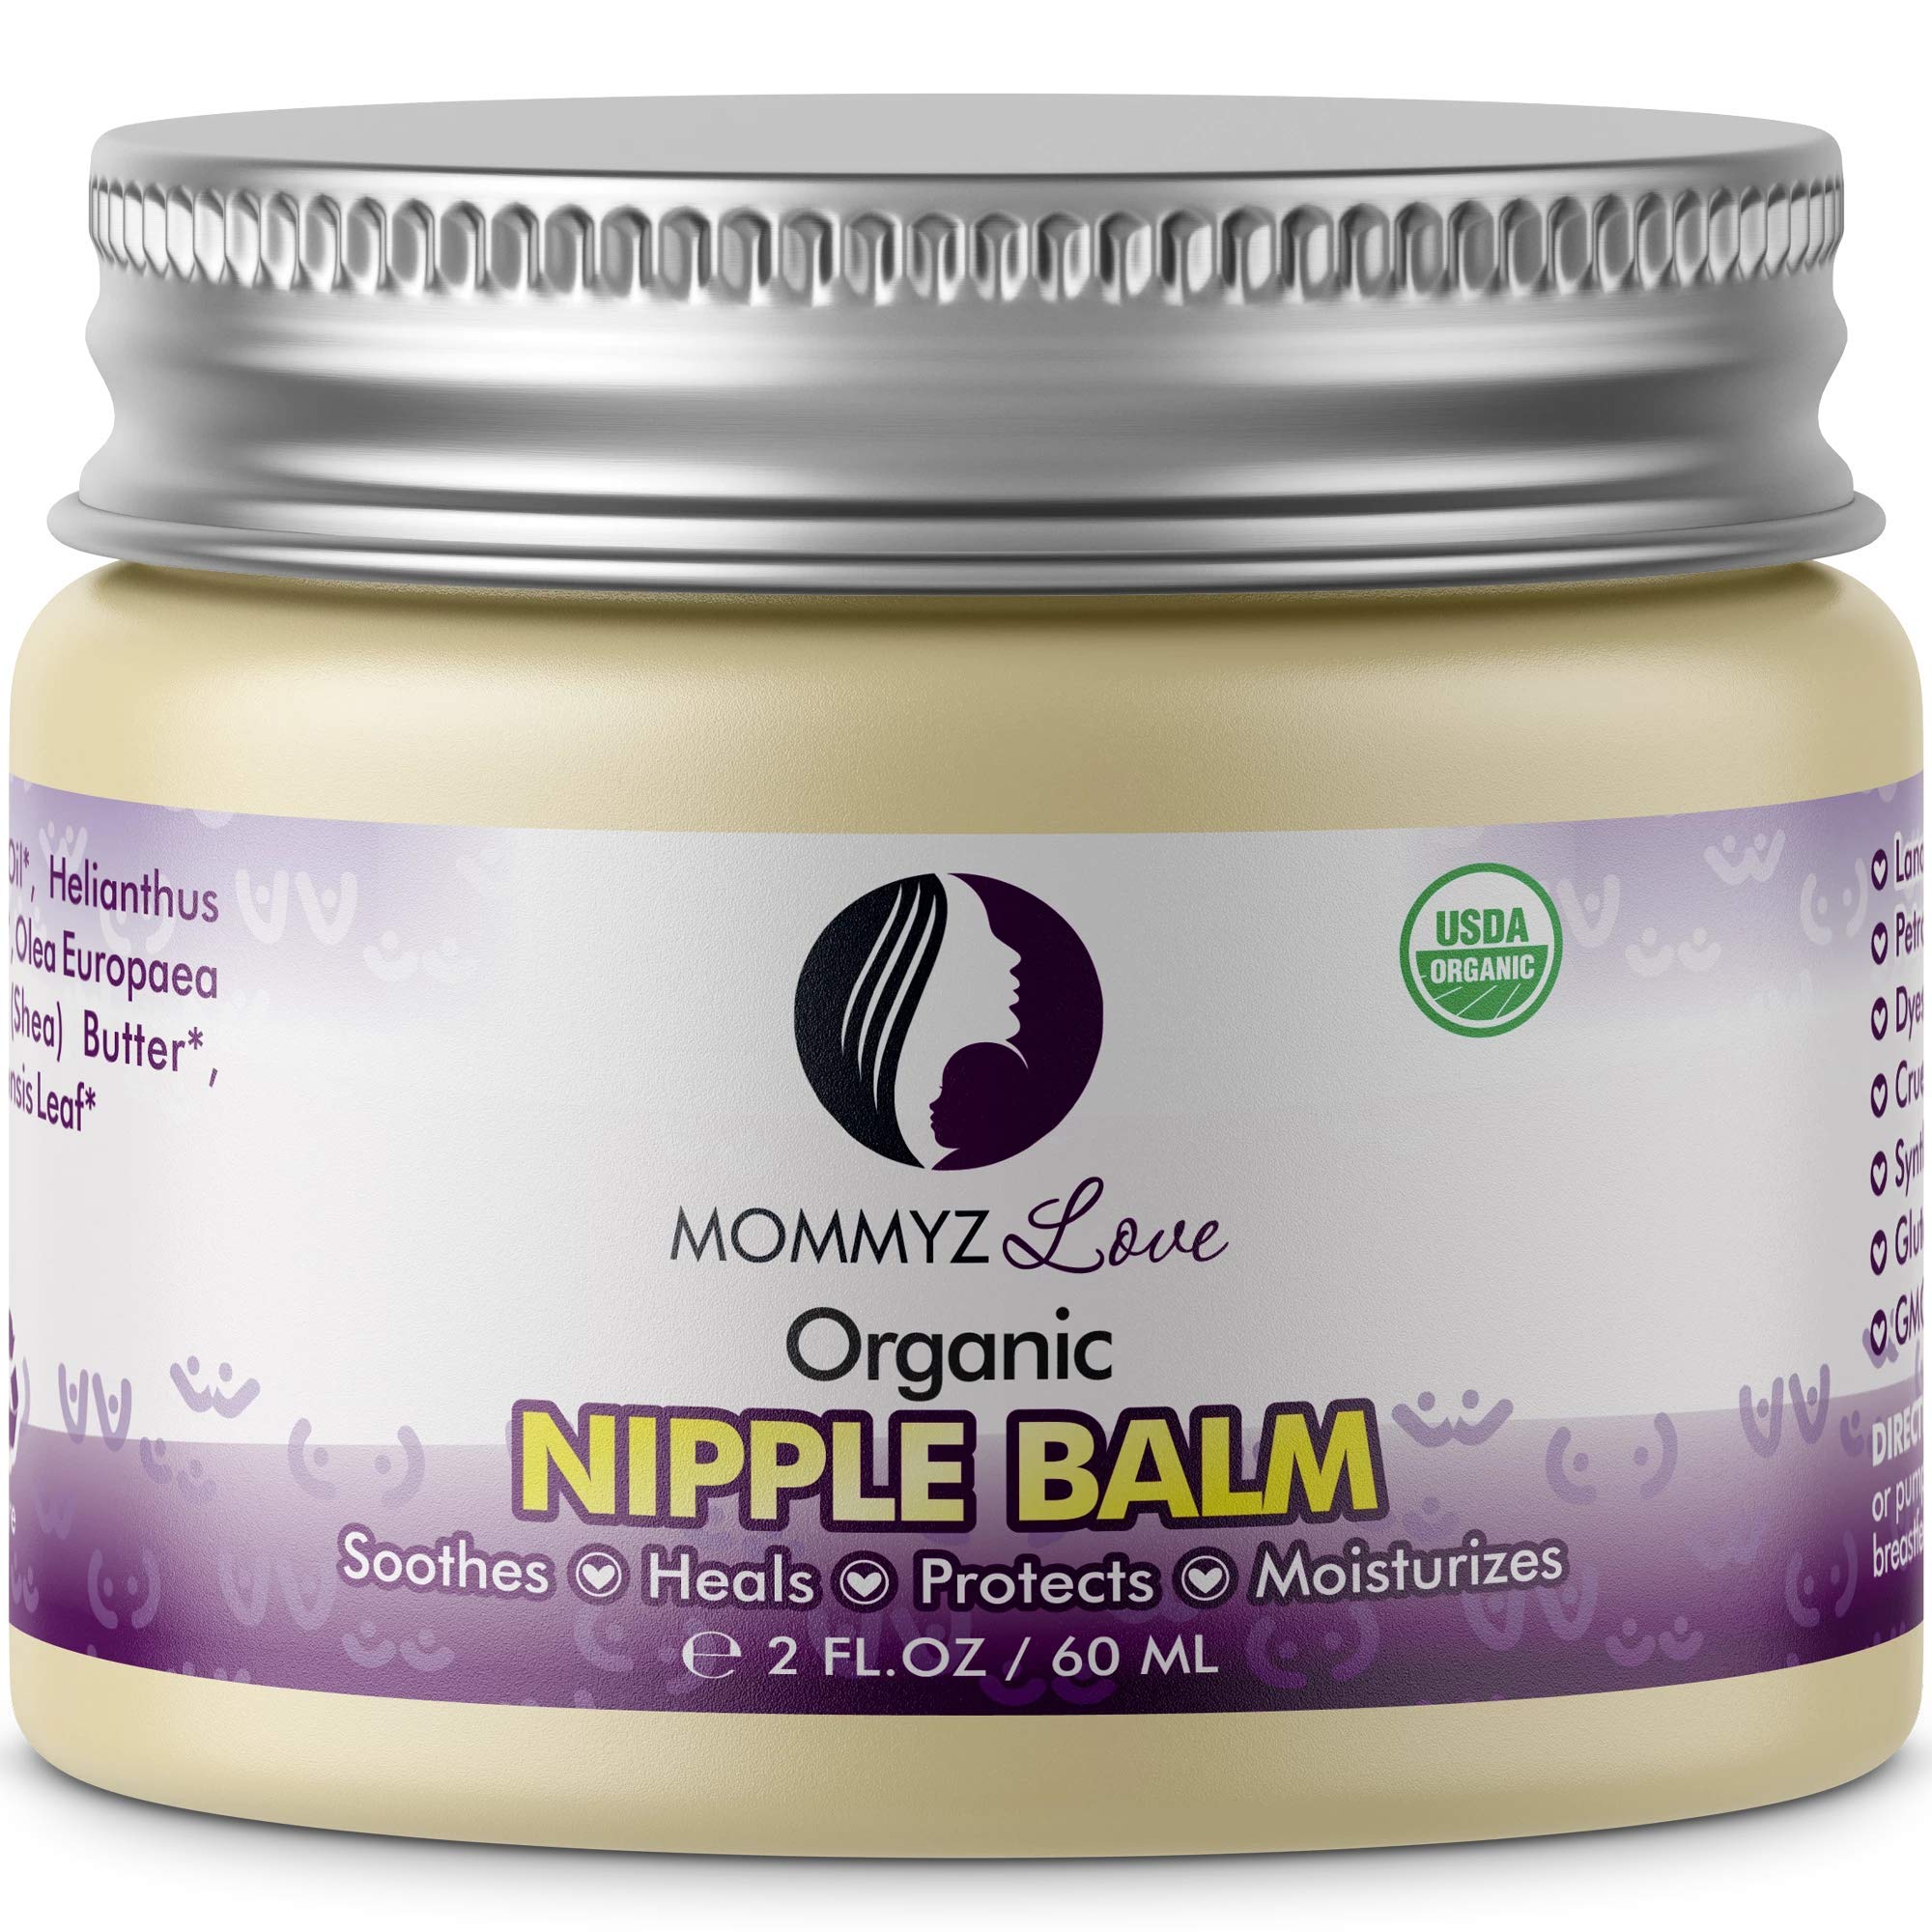 Best Nipple Cream for Breastfeeding Relief (2 oz) - Provides Immediate Relief To Sore, Dry And Cracked Nipples Even After A Single Use - PEDIATRICIAN TESTED - USDA Certified Organic (1 Jar)